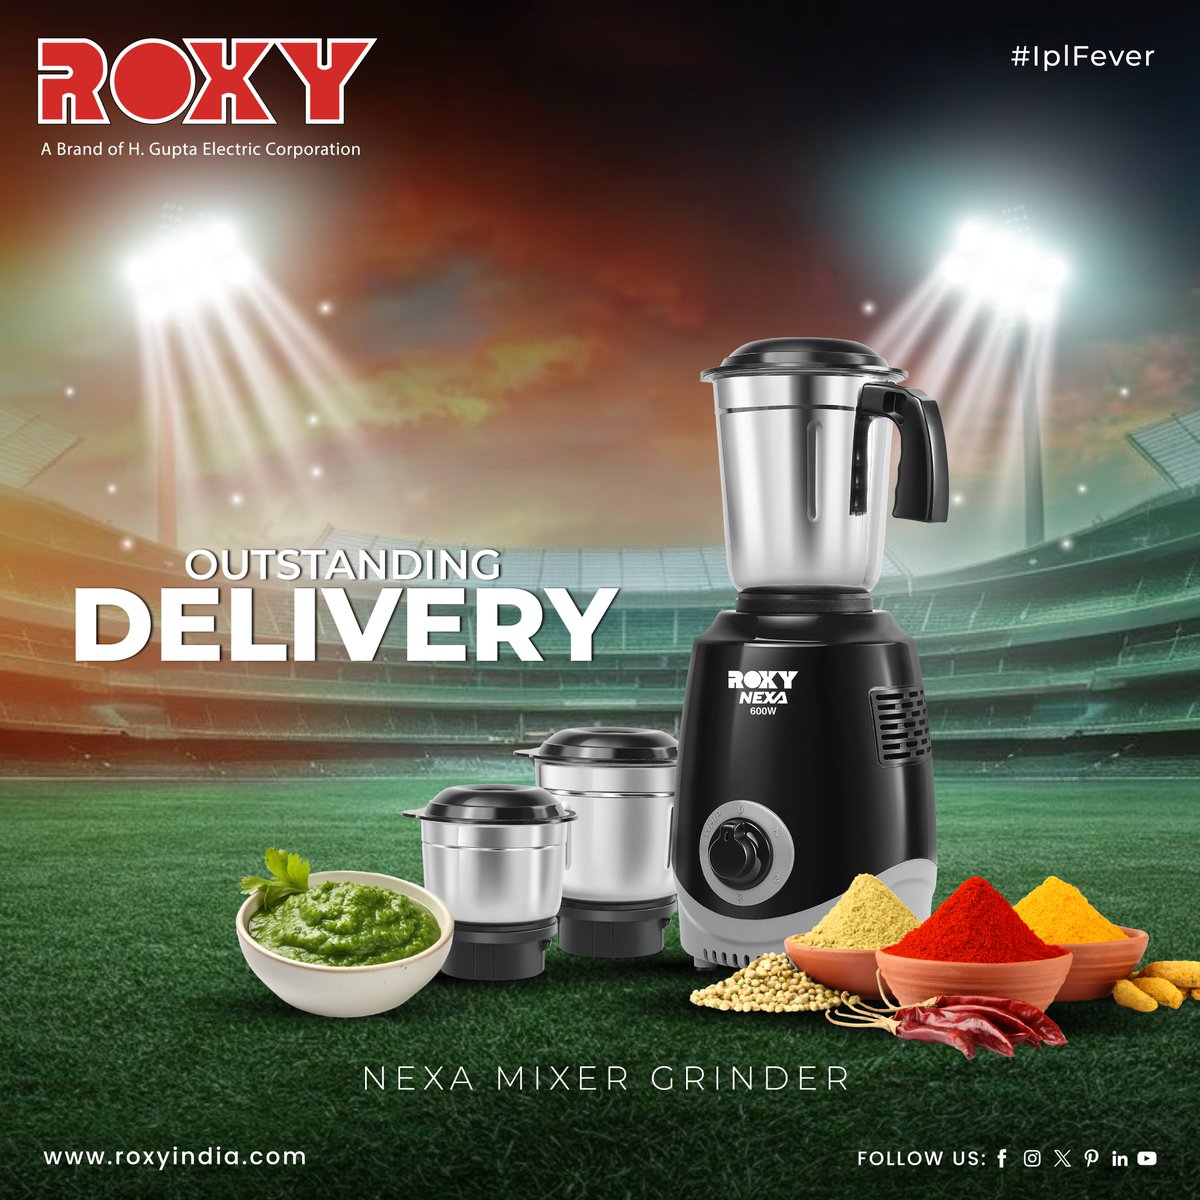 Experience outstanding efficiency with the ΝΕΧΑ Mixer Grinder from Roxy Home Appliances! 🌟 Delivering top performance and reliability straight to your kitchen. . . . . For more visit:- roxyindia.com . . . . #RoxyHomeAppliances #NEXHAMixerGrinder #EfficiencyDelivered